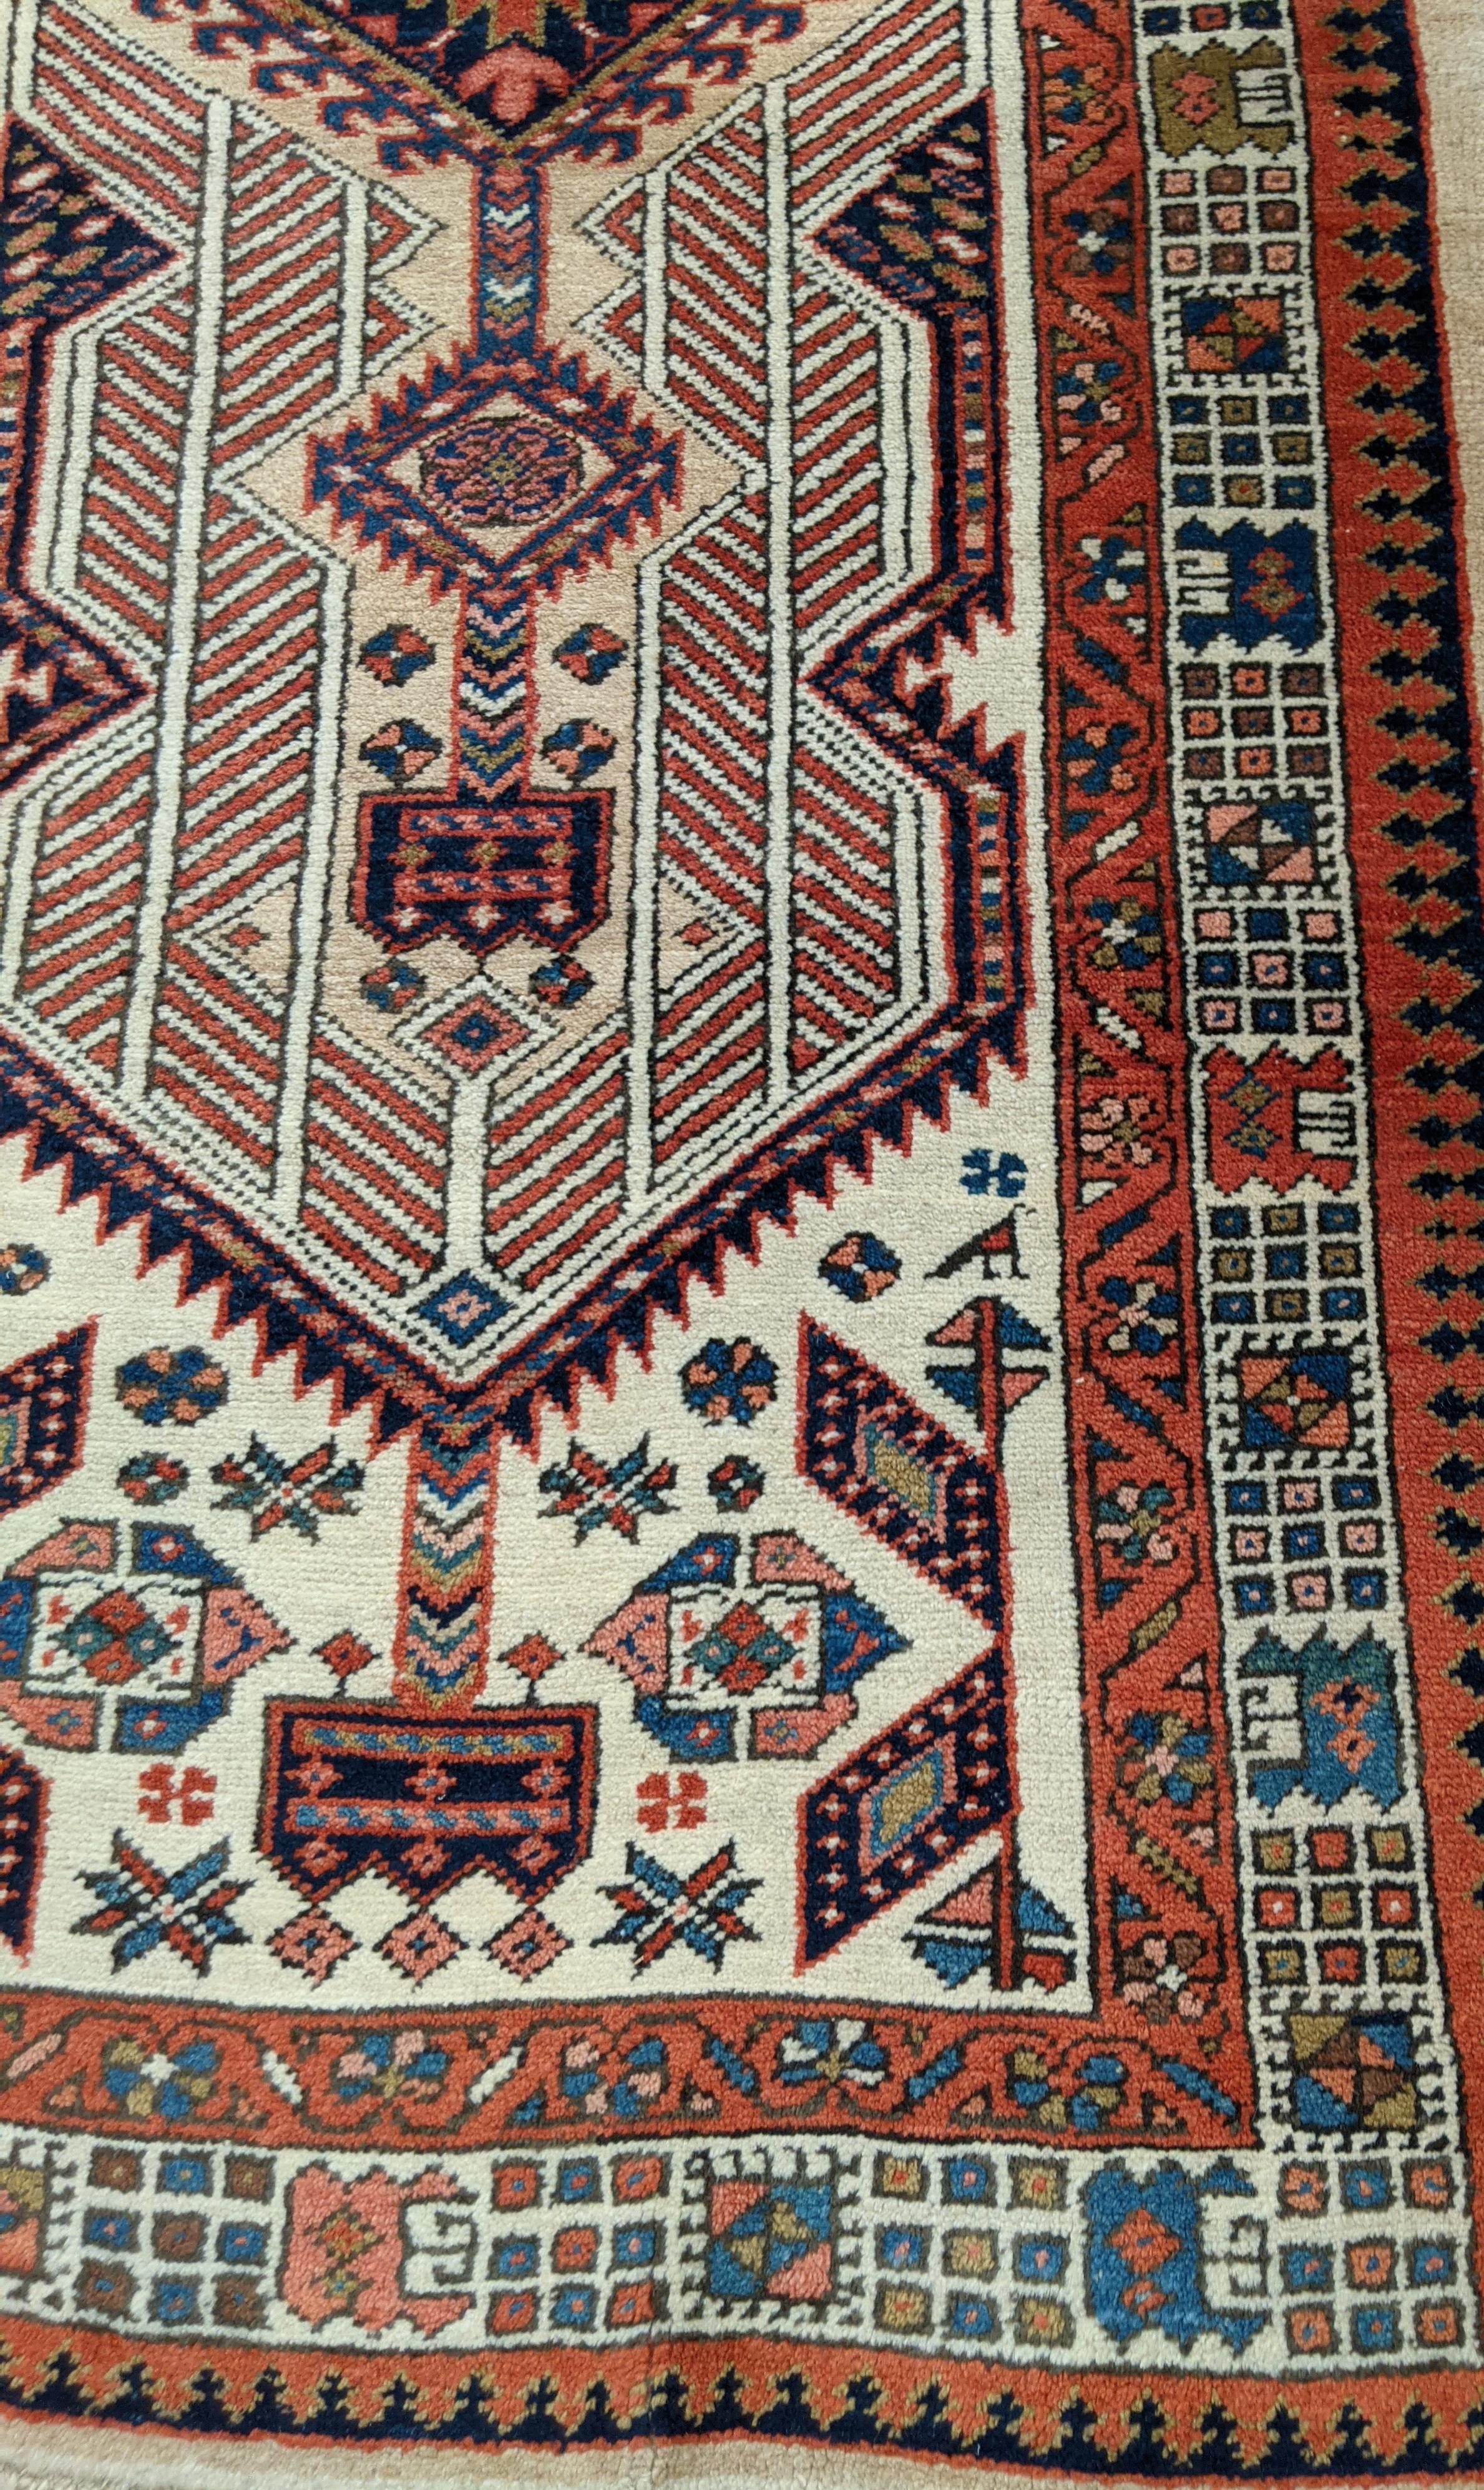 This is a striking antique Persian Serab. Serab rugs are known for their geometric design as well as the use of camel color. The typical Serab motif with the use of a cinnamon rust color is accented on the camel field. This rug is 3-4x7-11 and is